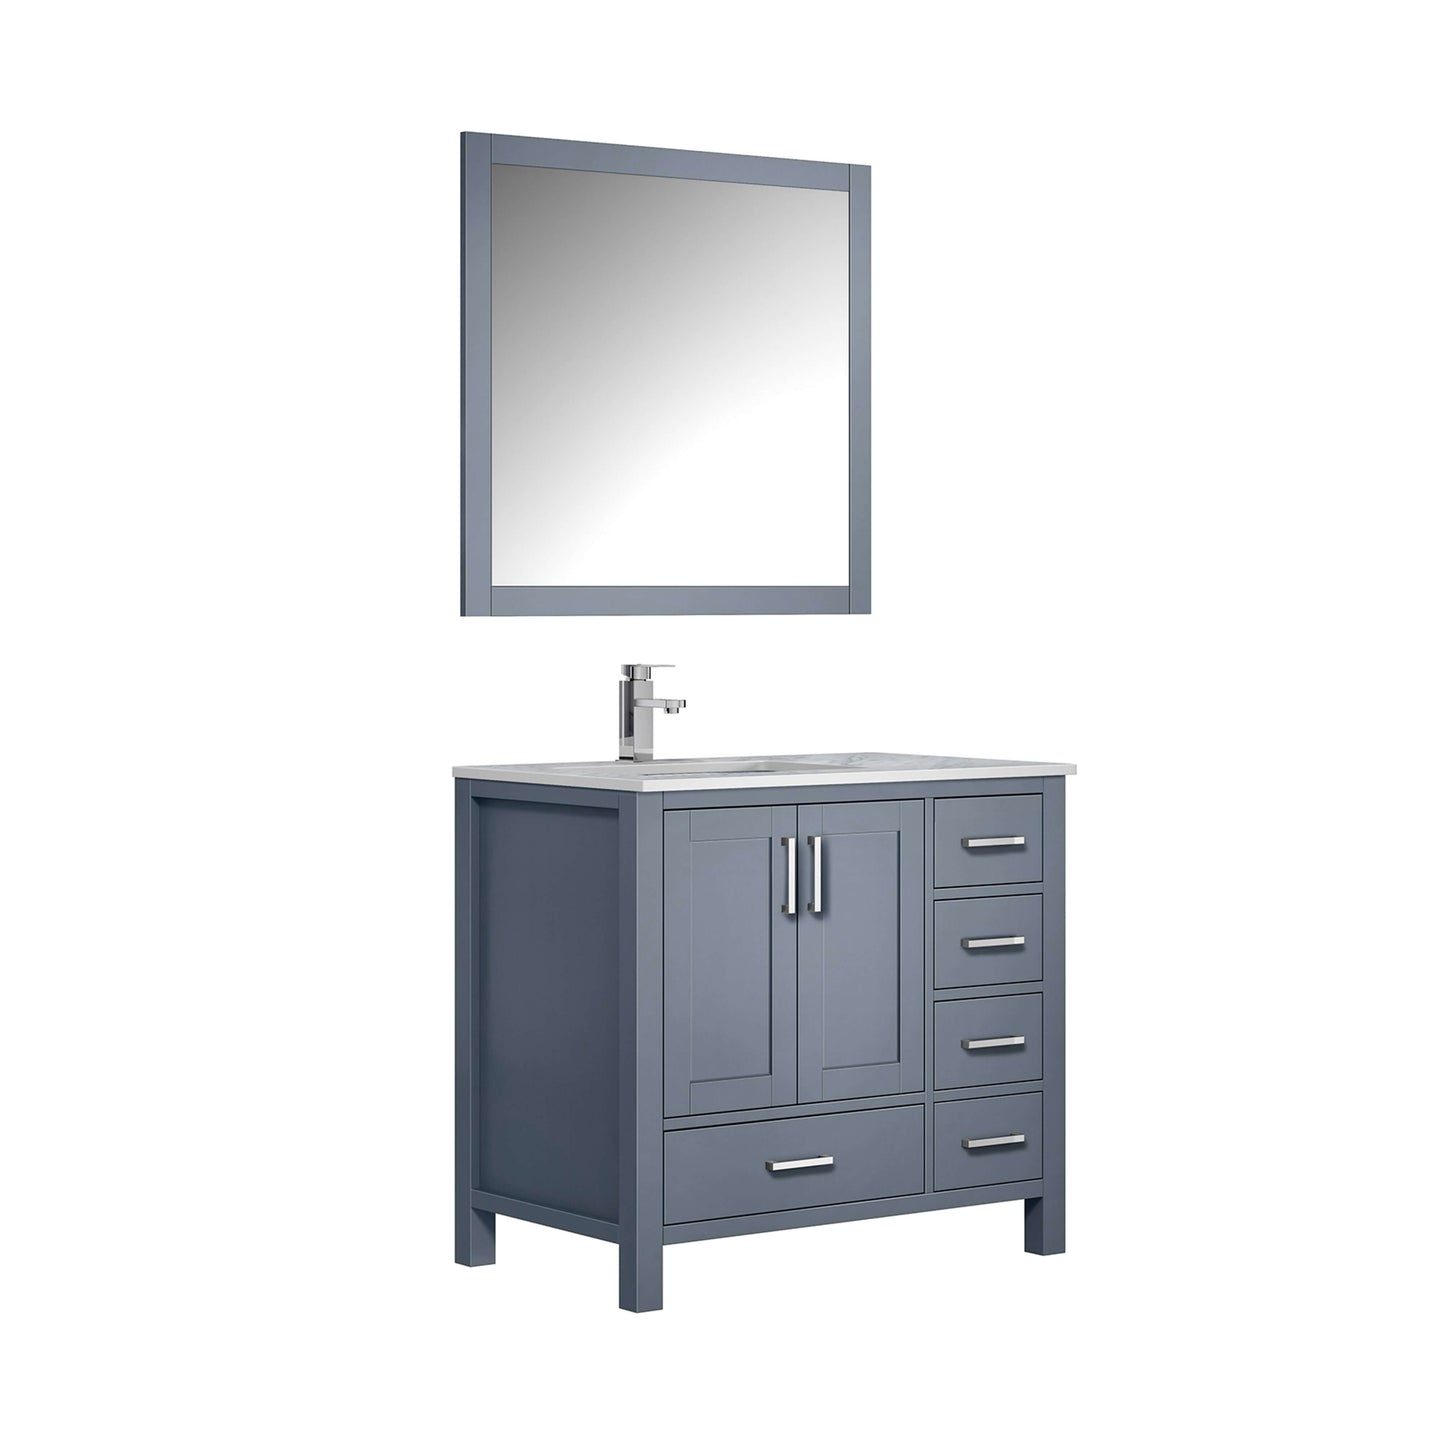 Jacques 36" Dark Grey Single Vanity, White Carrara Marble Top, White Square Sink and 34" Mirror w/ Faucet - Left Version - LJ342236SBDSM34FL